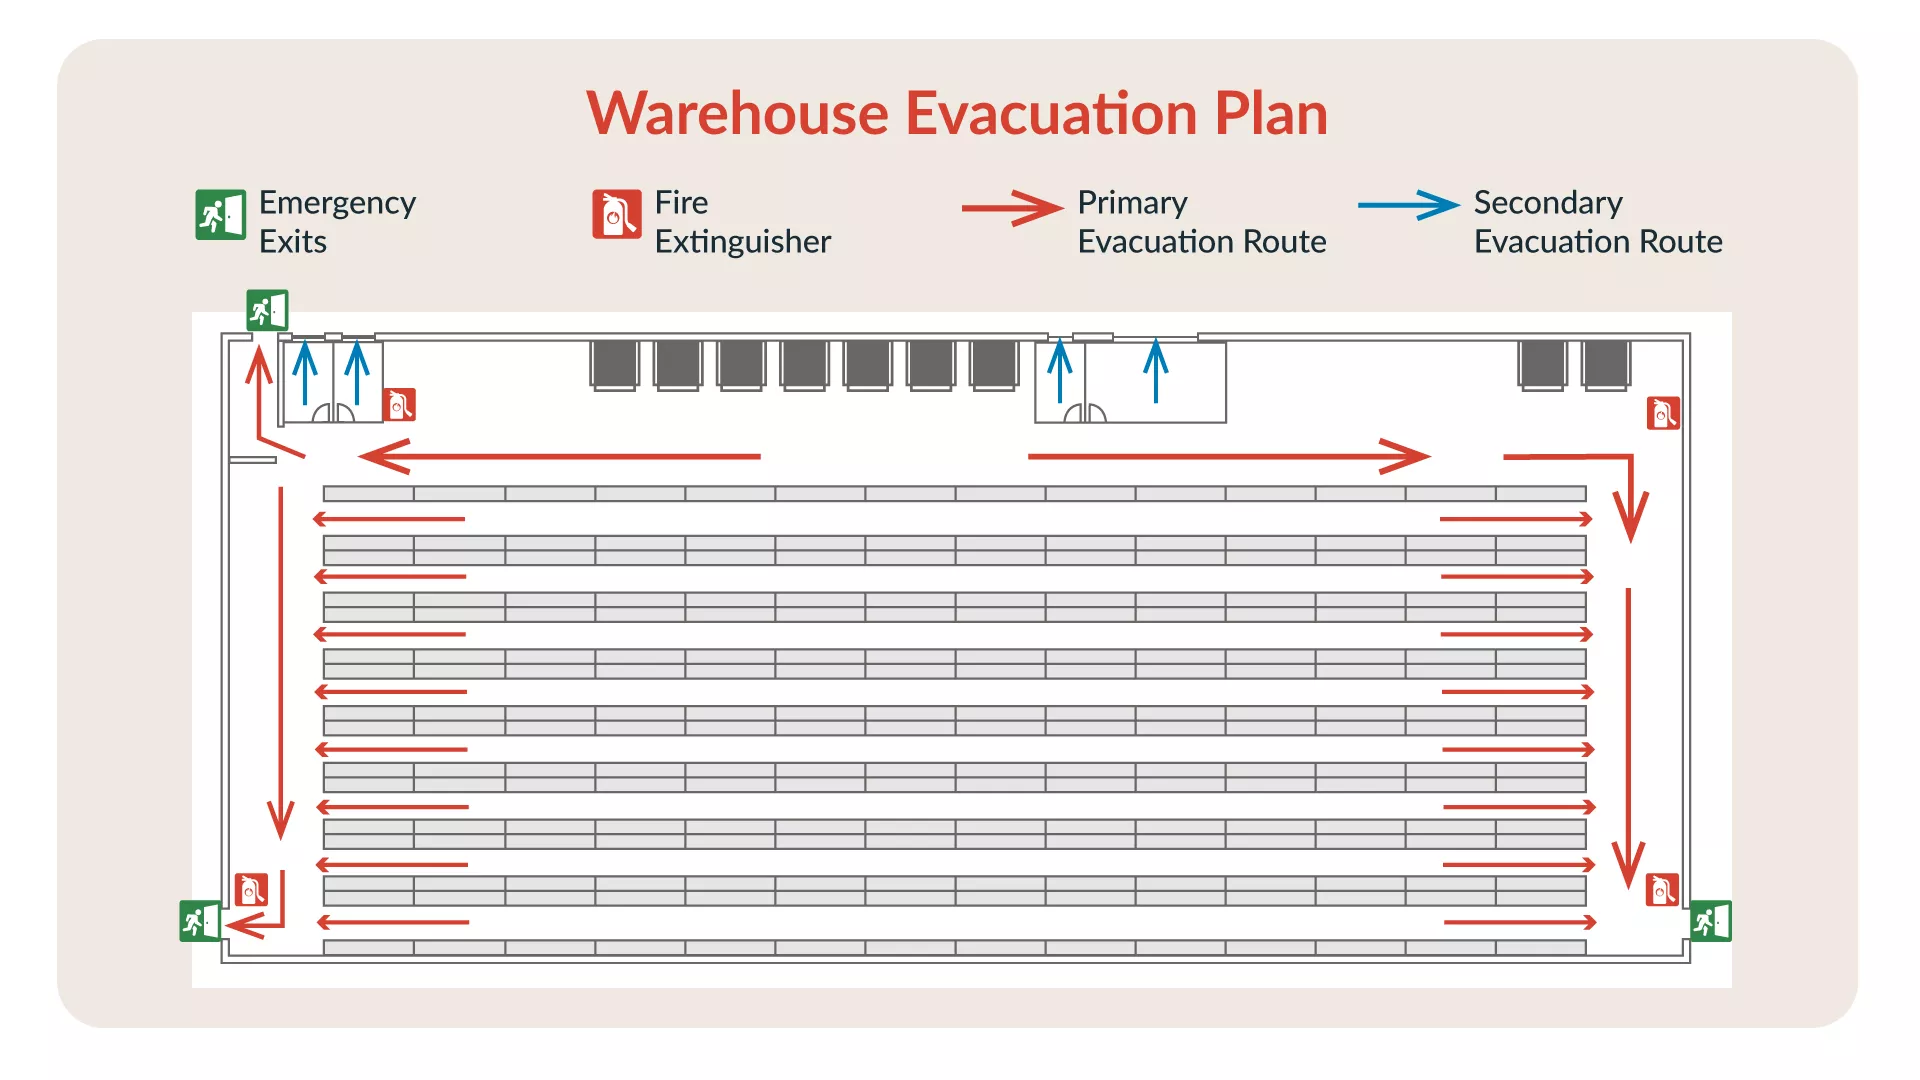 A sample evacuation plan for a warehouse